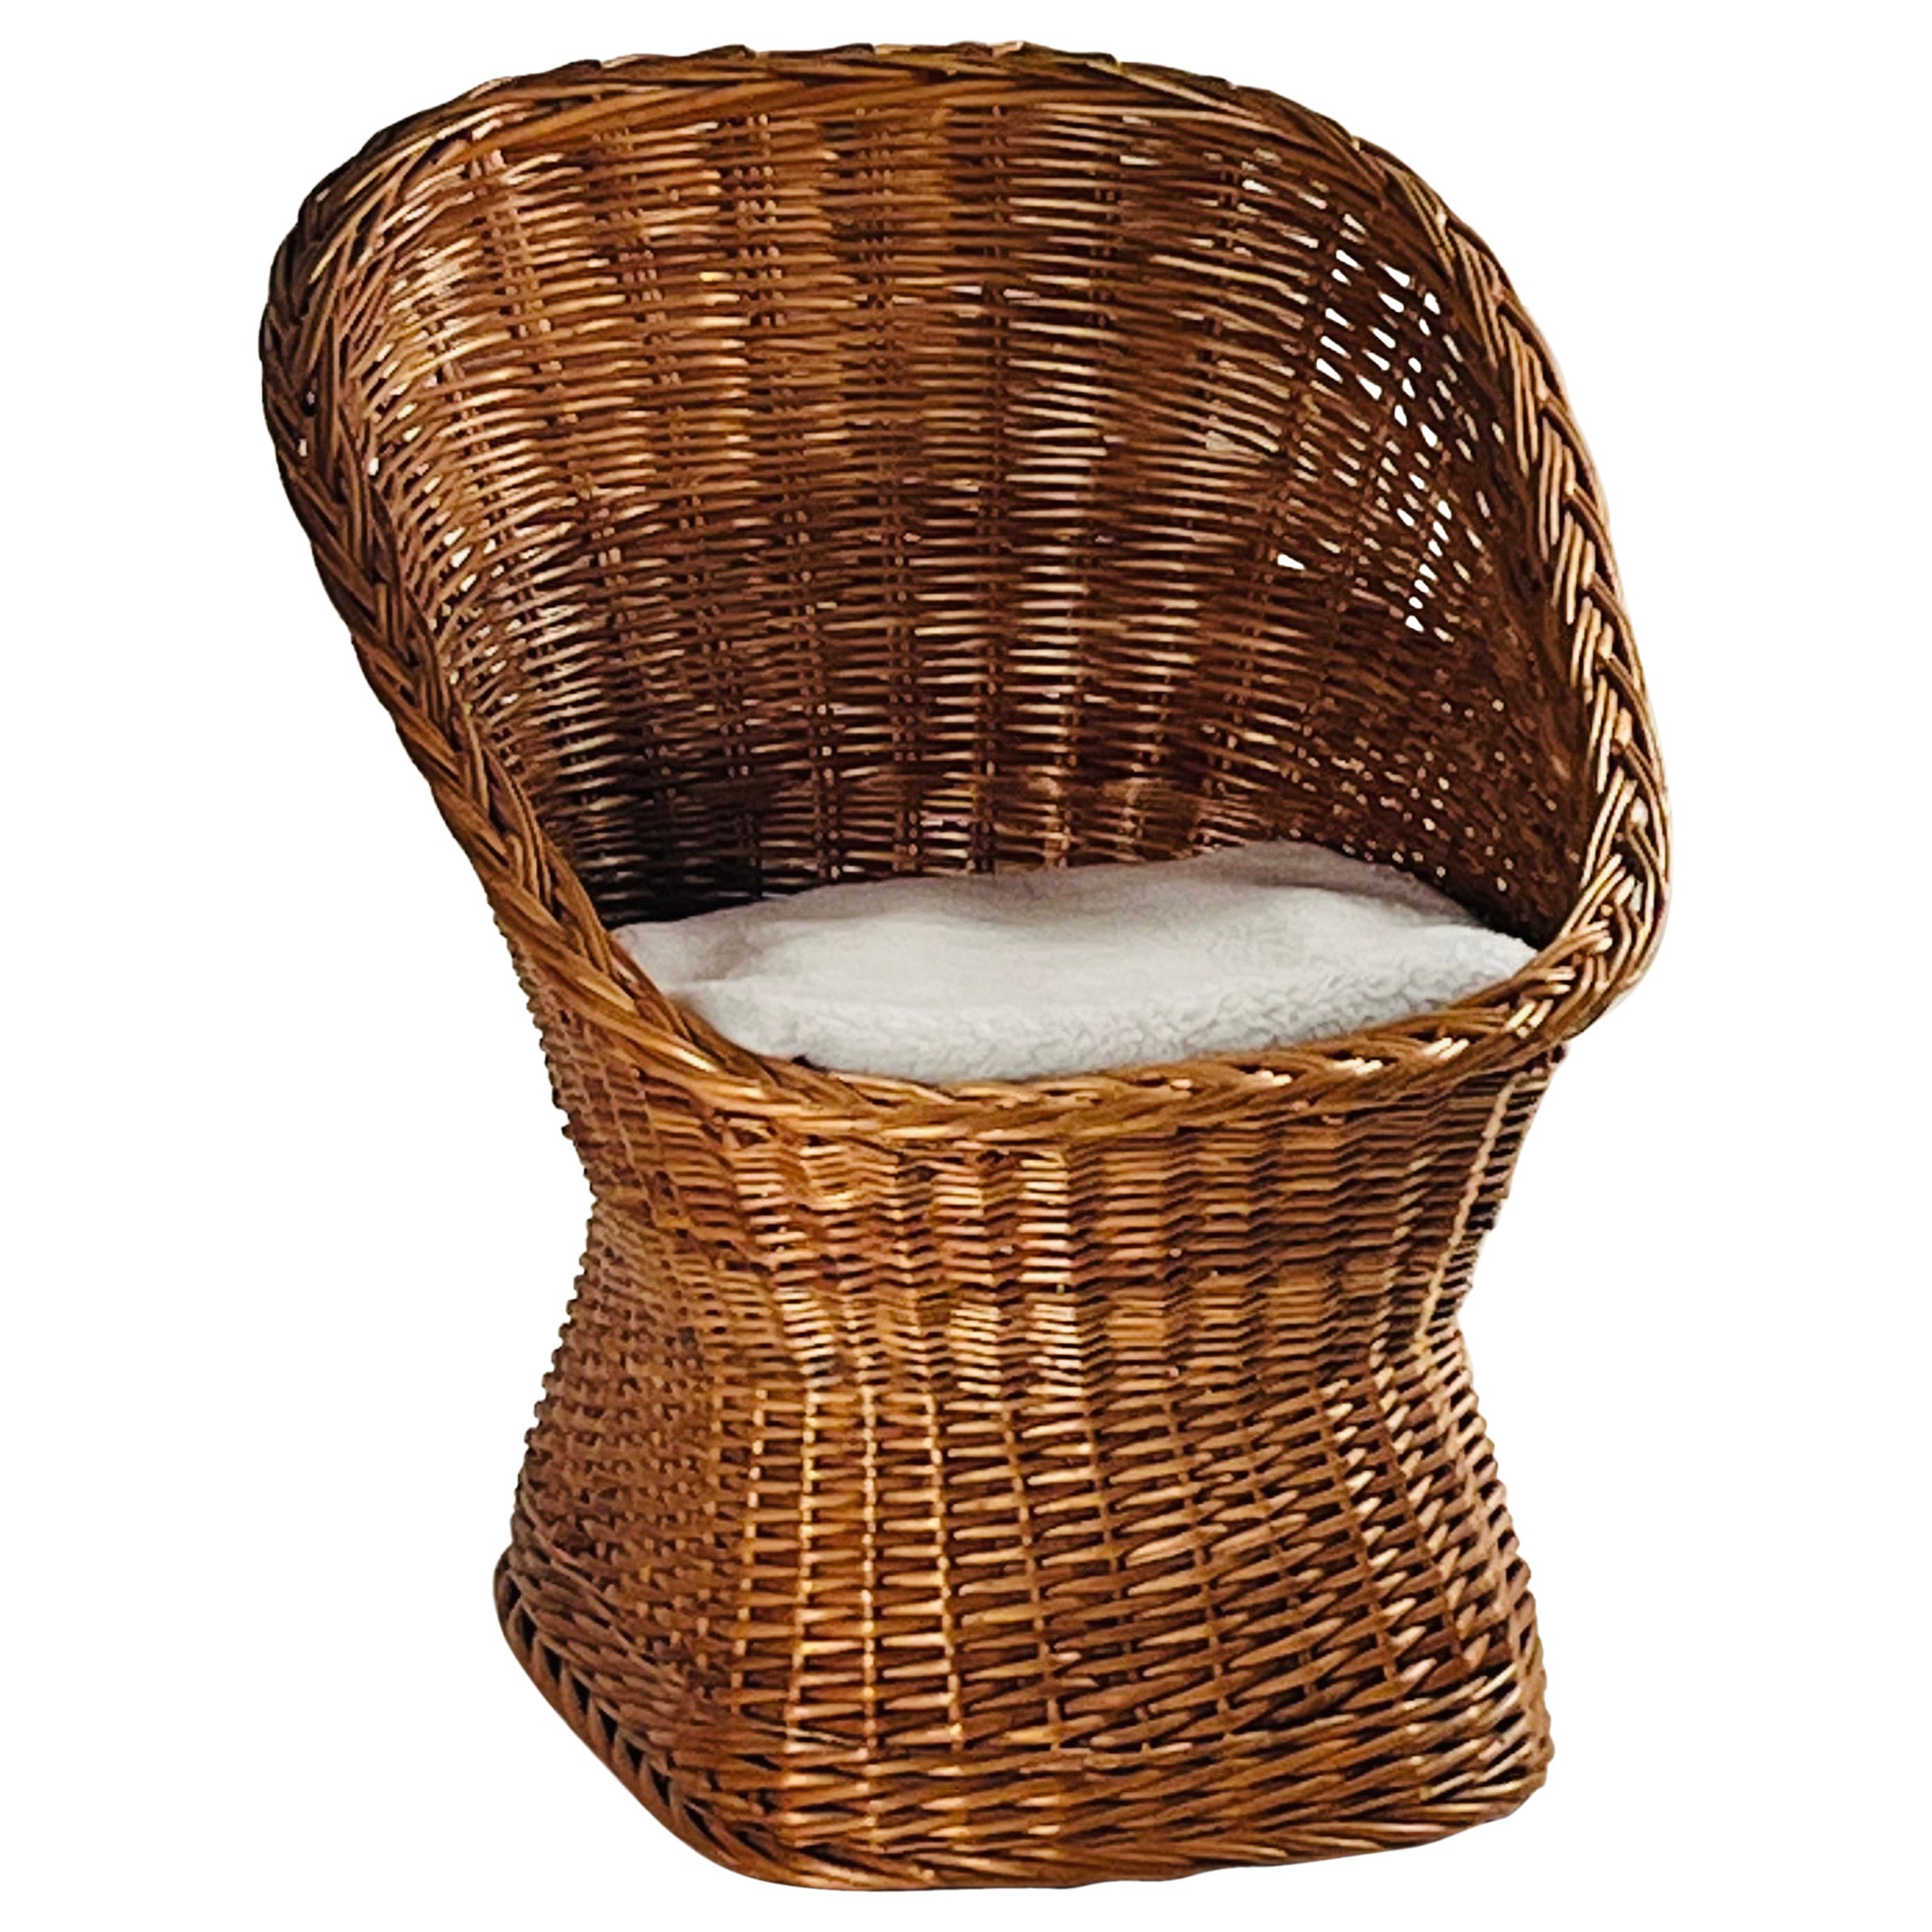 Woven Rattan Wicker Barrel Chair with Shearling Pad For Sale